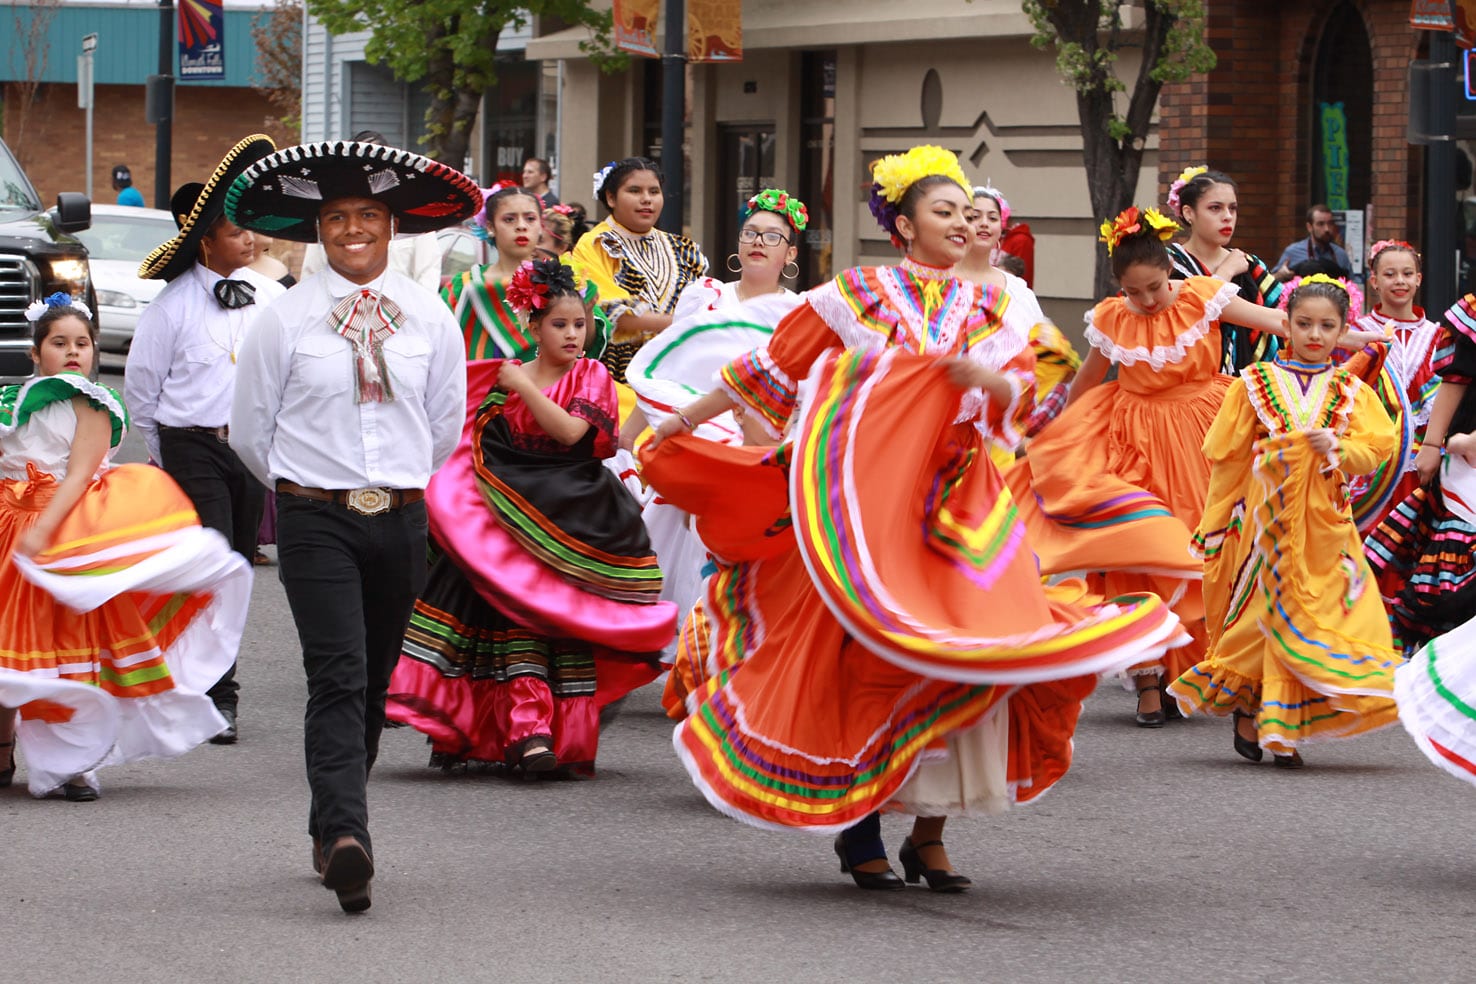 8-facts-about-cultural-festivals-and-events-in-whittier-california